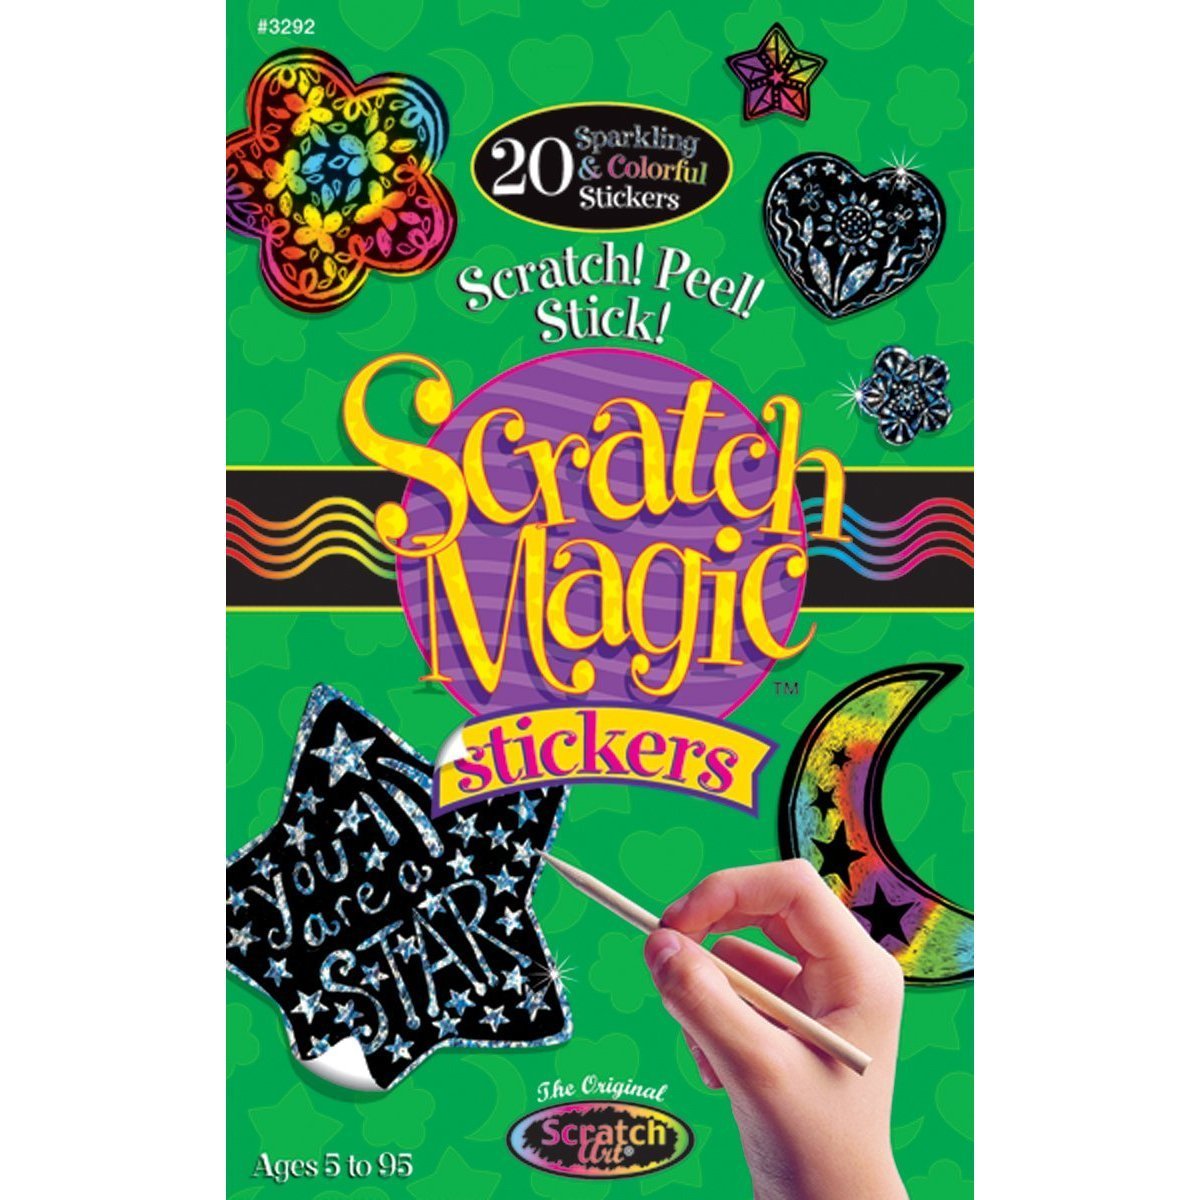 Melissa and Doug Silver & Rainbow Scratch Art Stickers (3292) Ages 5 to 95 [Home Decor]- Olde Church Emporium